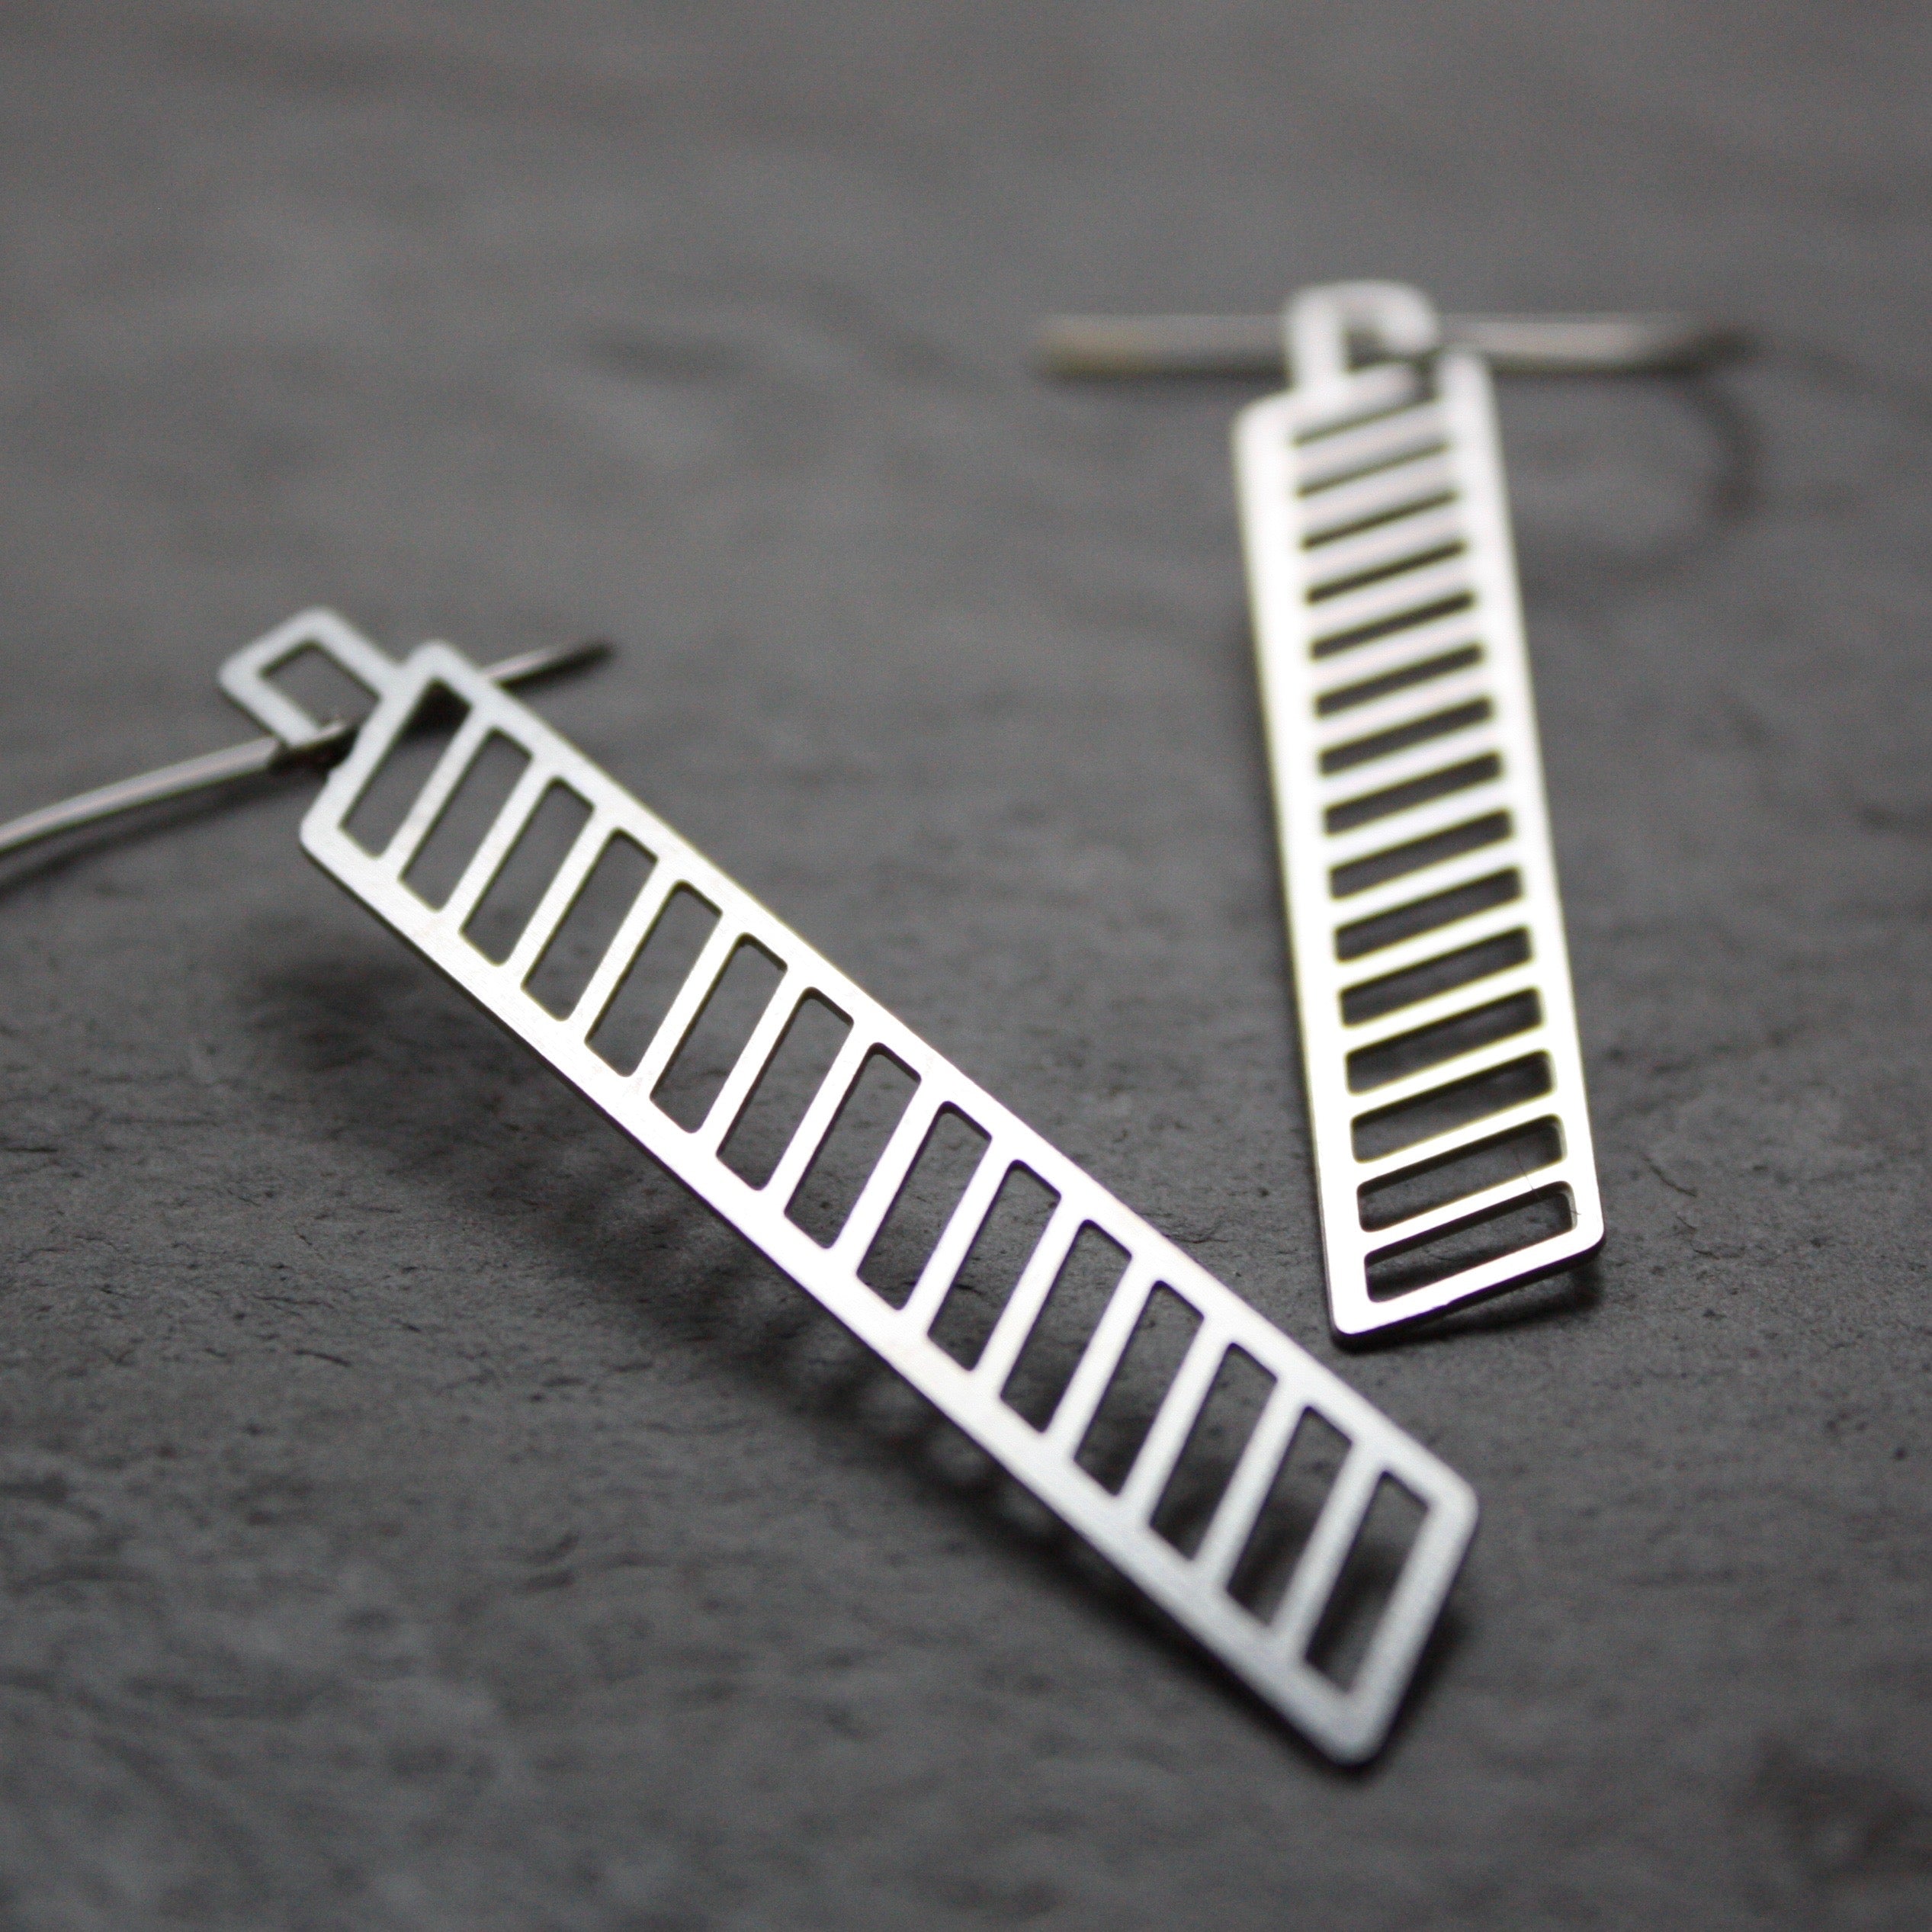 Stainless steel chevron earrings by Audra Azoury